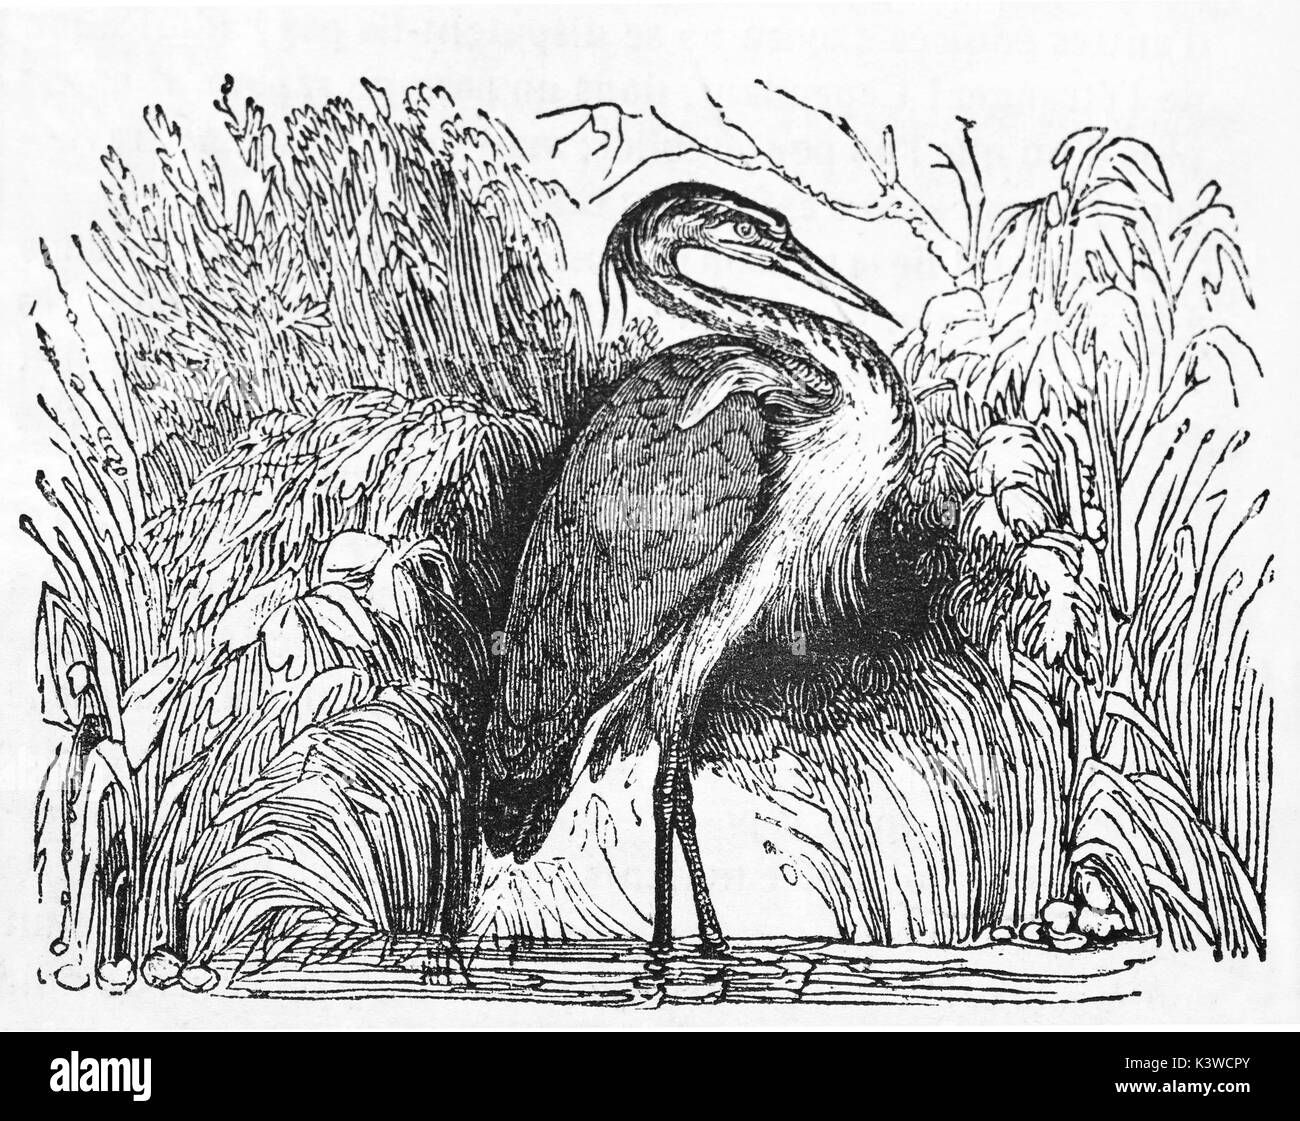 Old illustration of an Heron (Ardea cinerea). By unidentified author, published on Magasin Pittoresque, Paris, 1841 Stock Photo